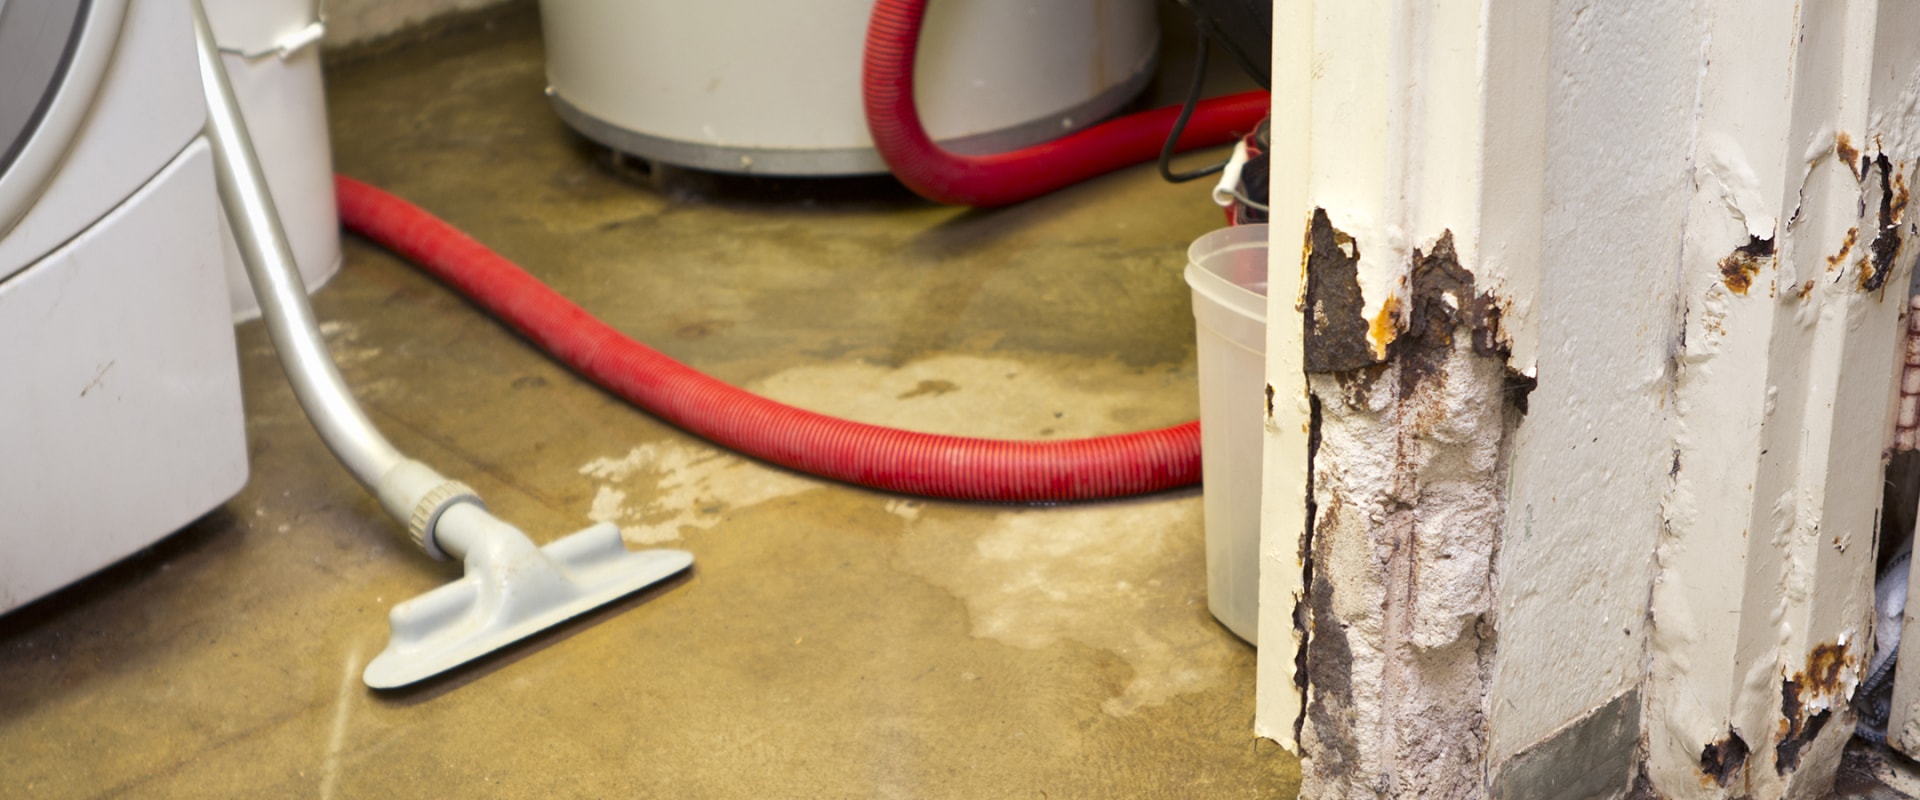 Choosing the Right Water Damage Company: Why Experience Matters